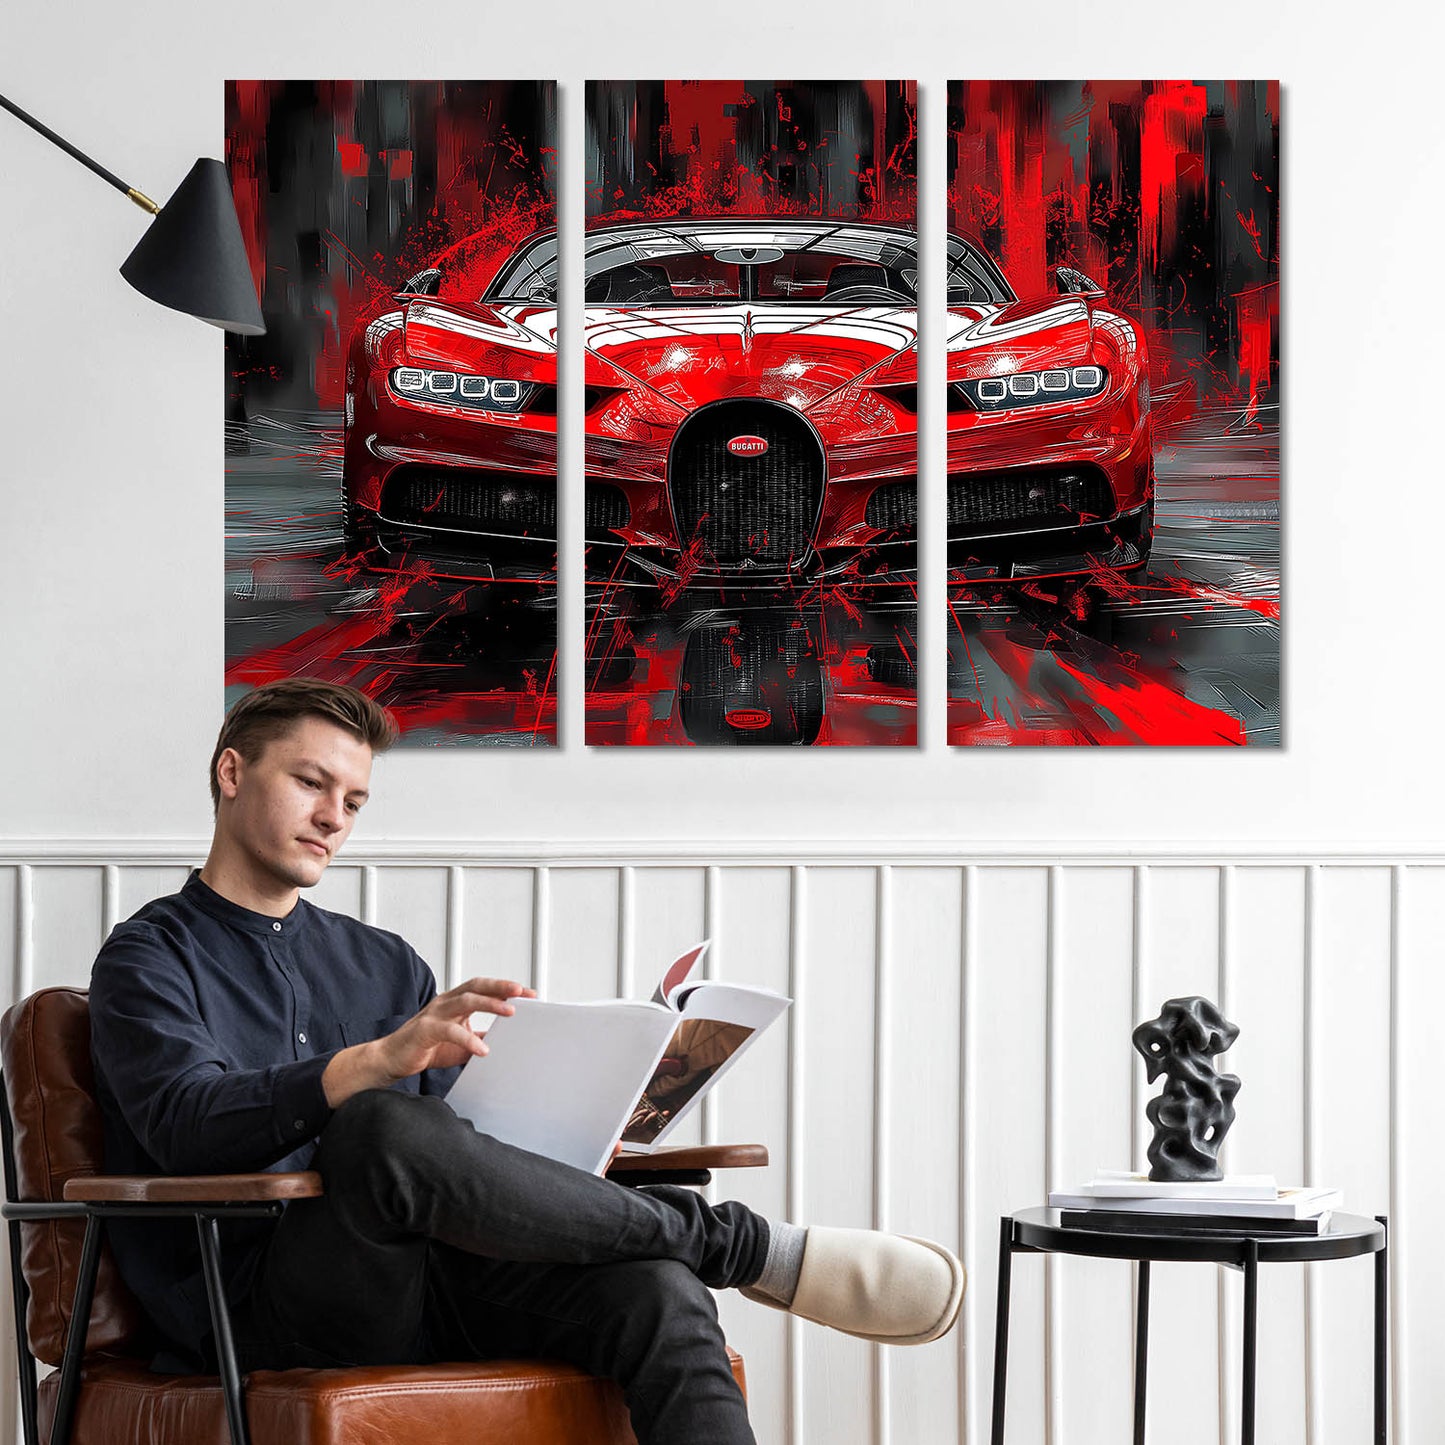 Red Bugatti Chiron Wall Art Canvas For Home Décor Office Living Room